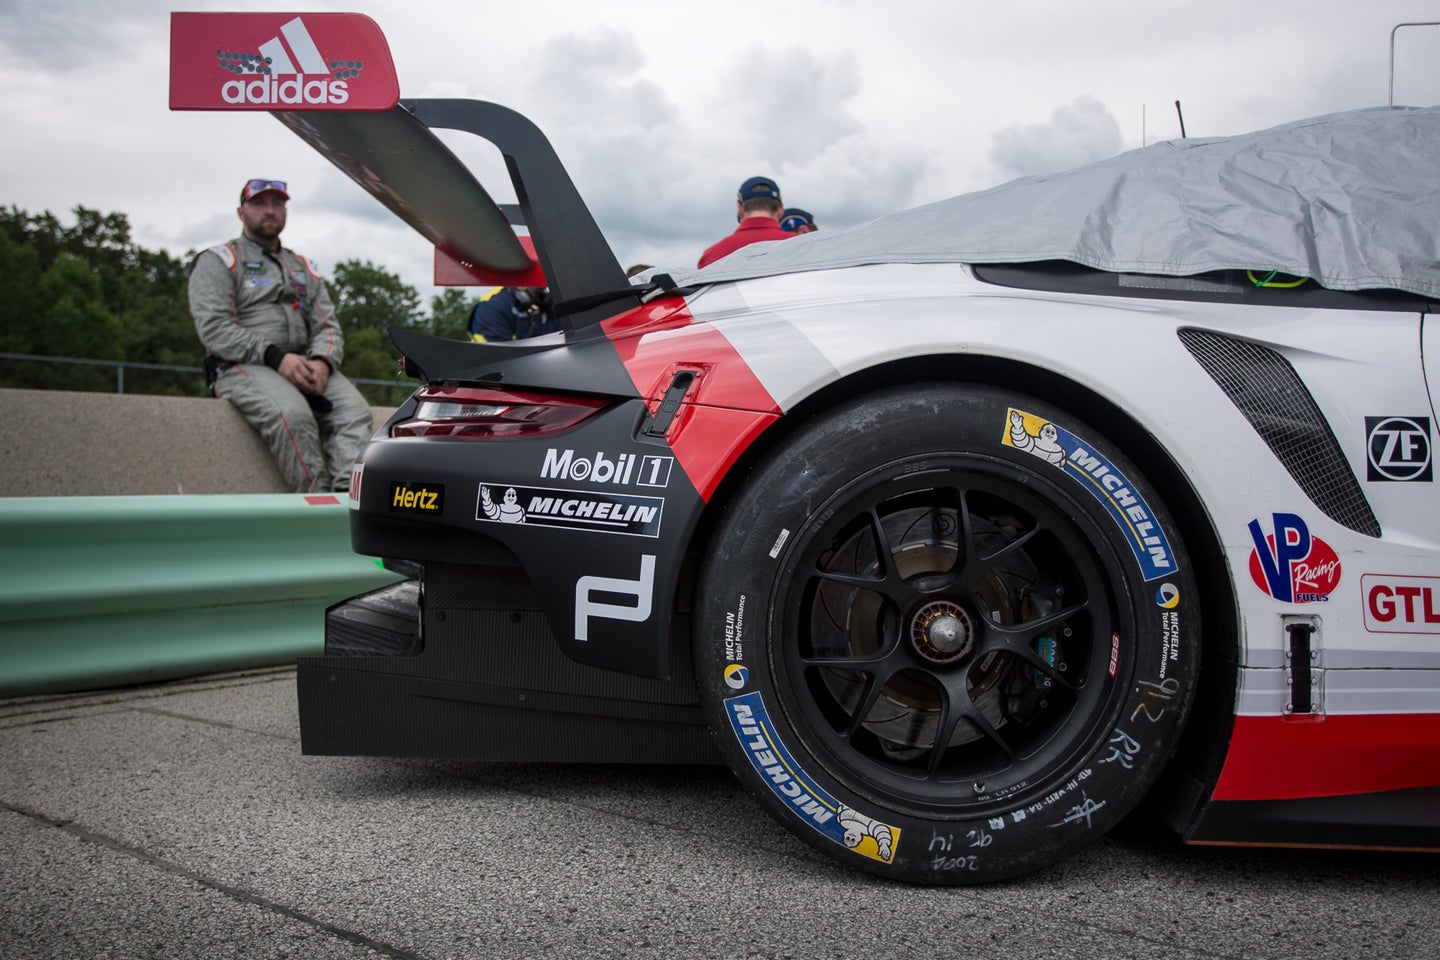 Check Out These Awesome Porsche Photos From The IMSA Race At Road America